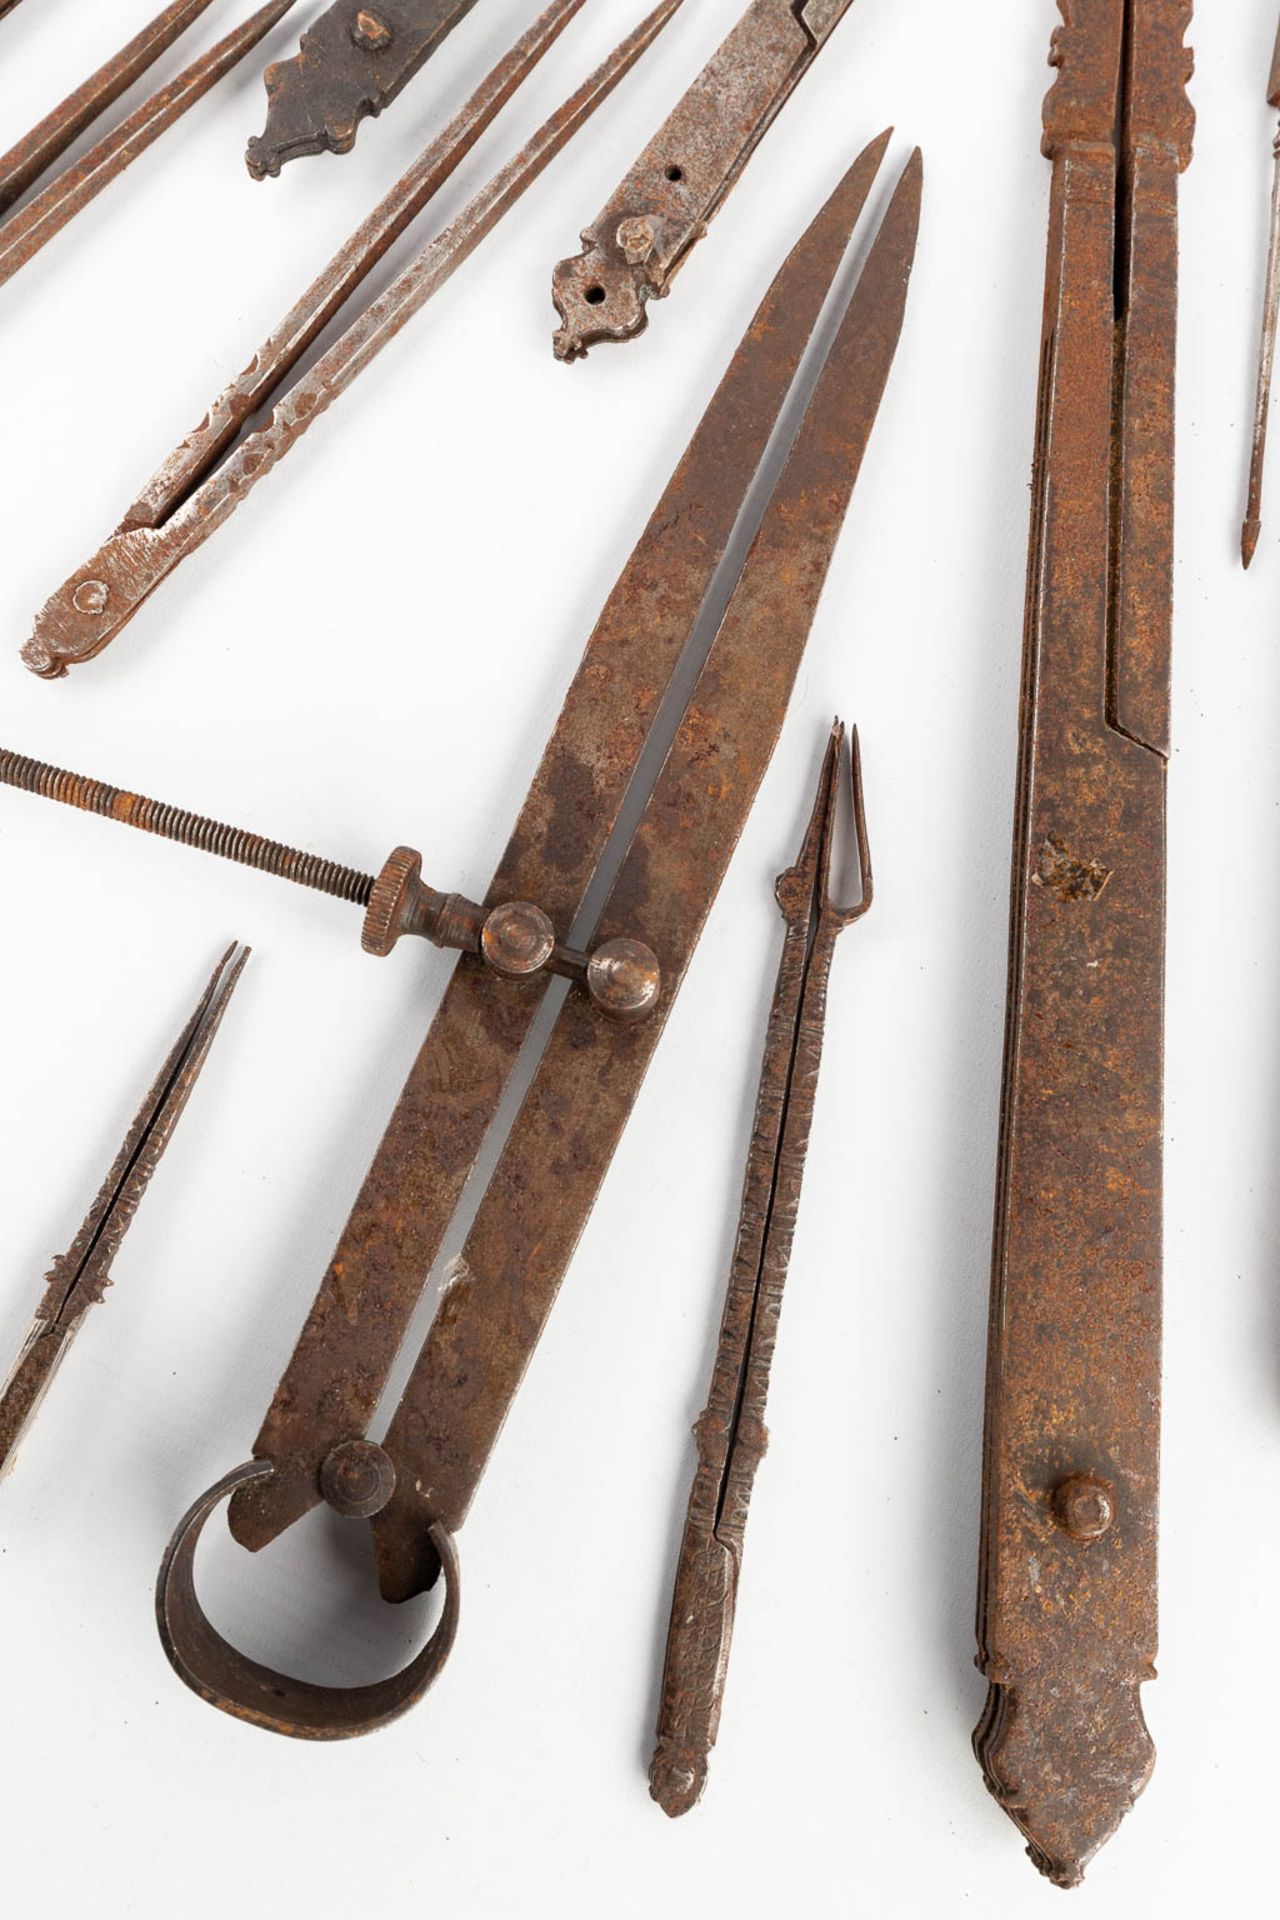 A large collection of 14 Ottoman steel measuring and marking devices and astronomy, Islamic arts. Ot - Image 5 of 7